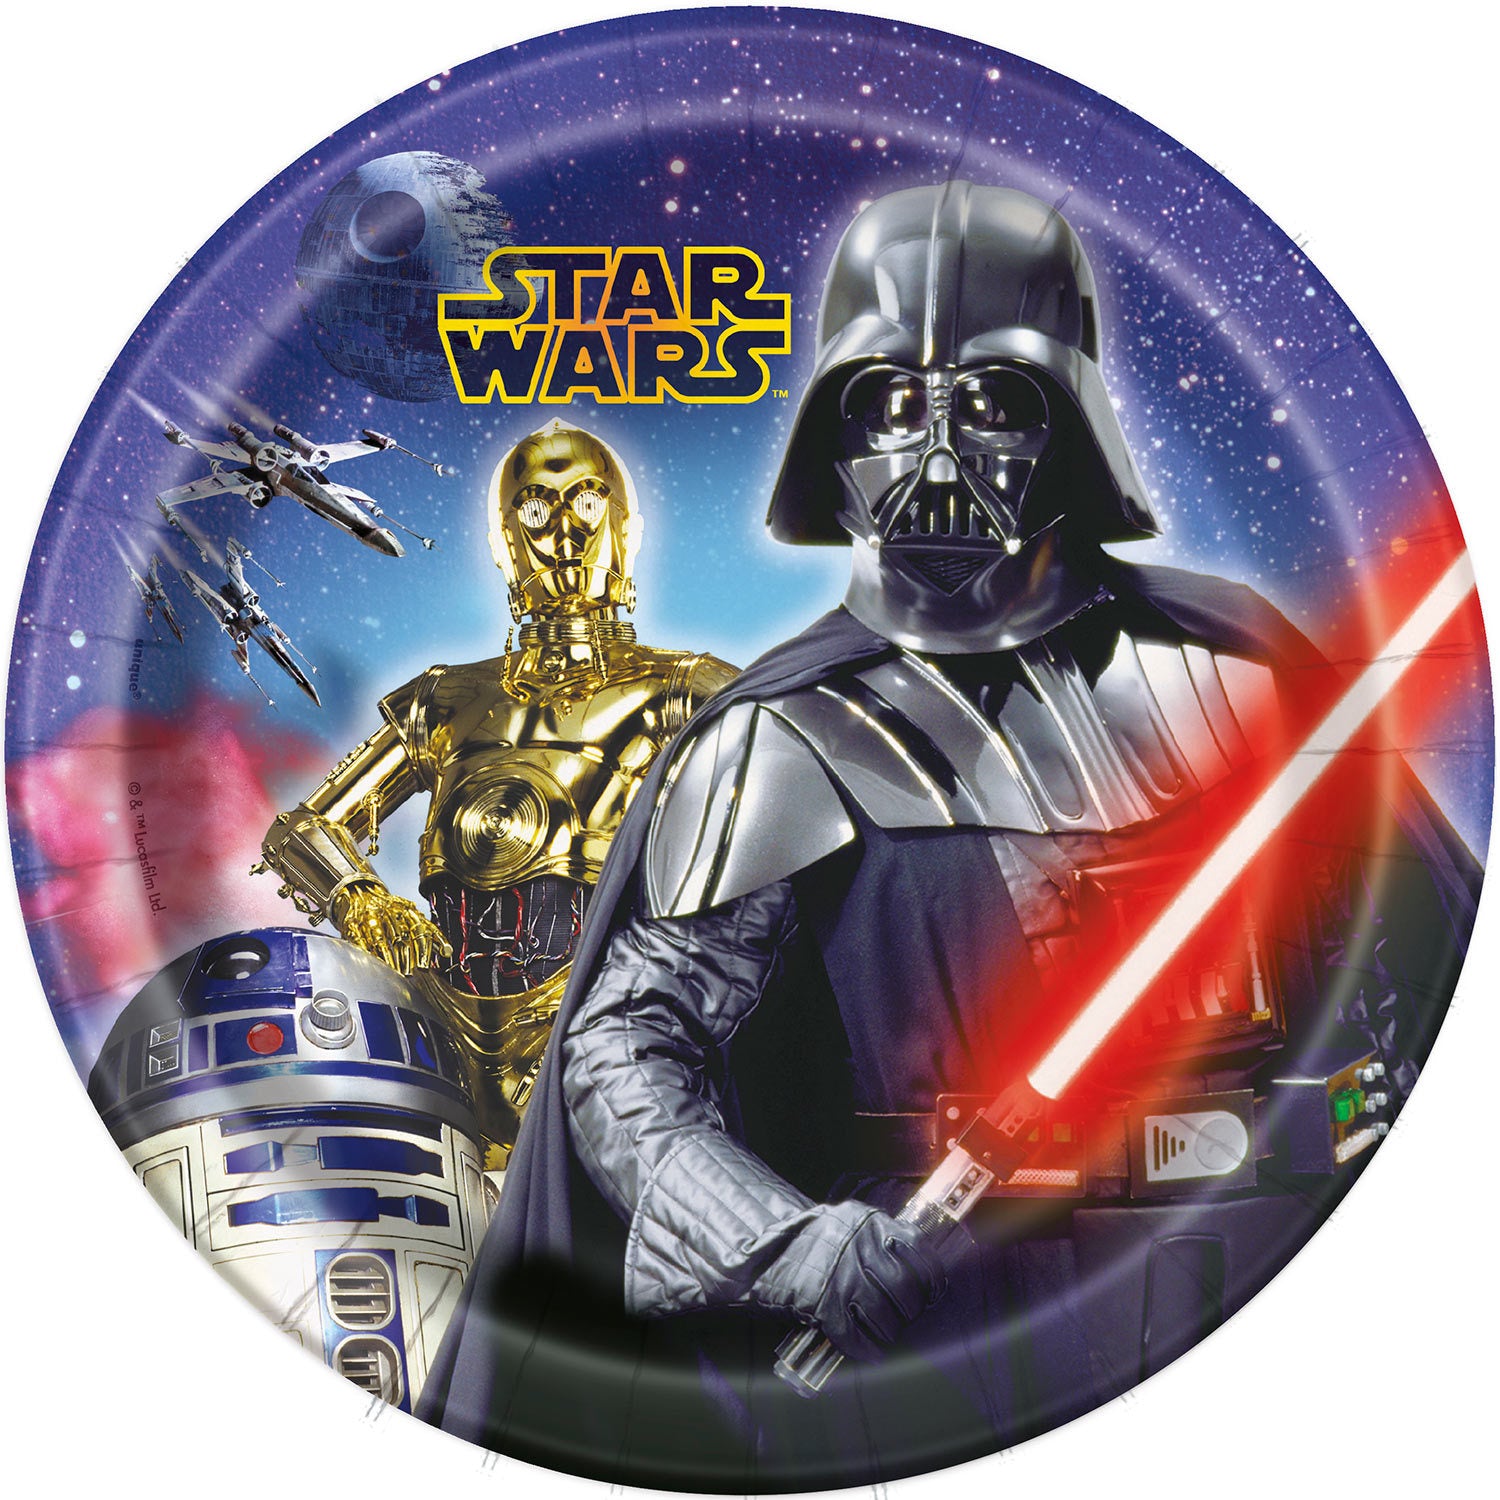 Star Wars 9 Inch Paper Plates [8 Per Pack]